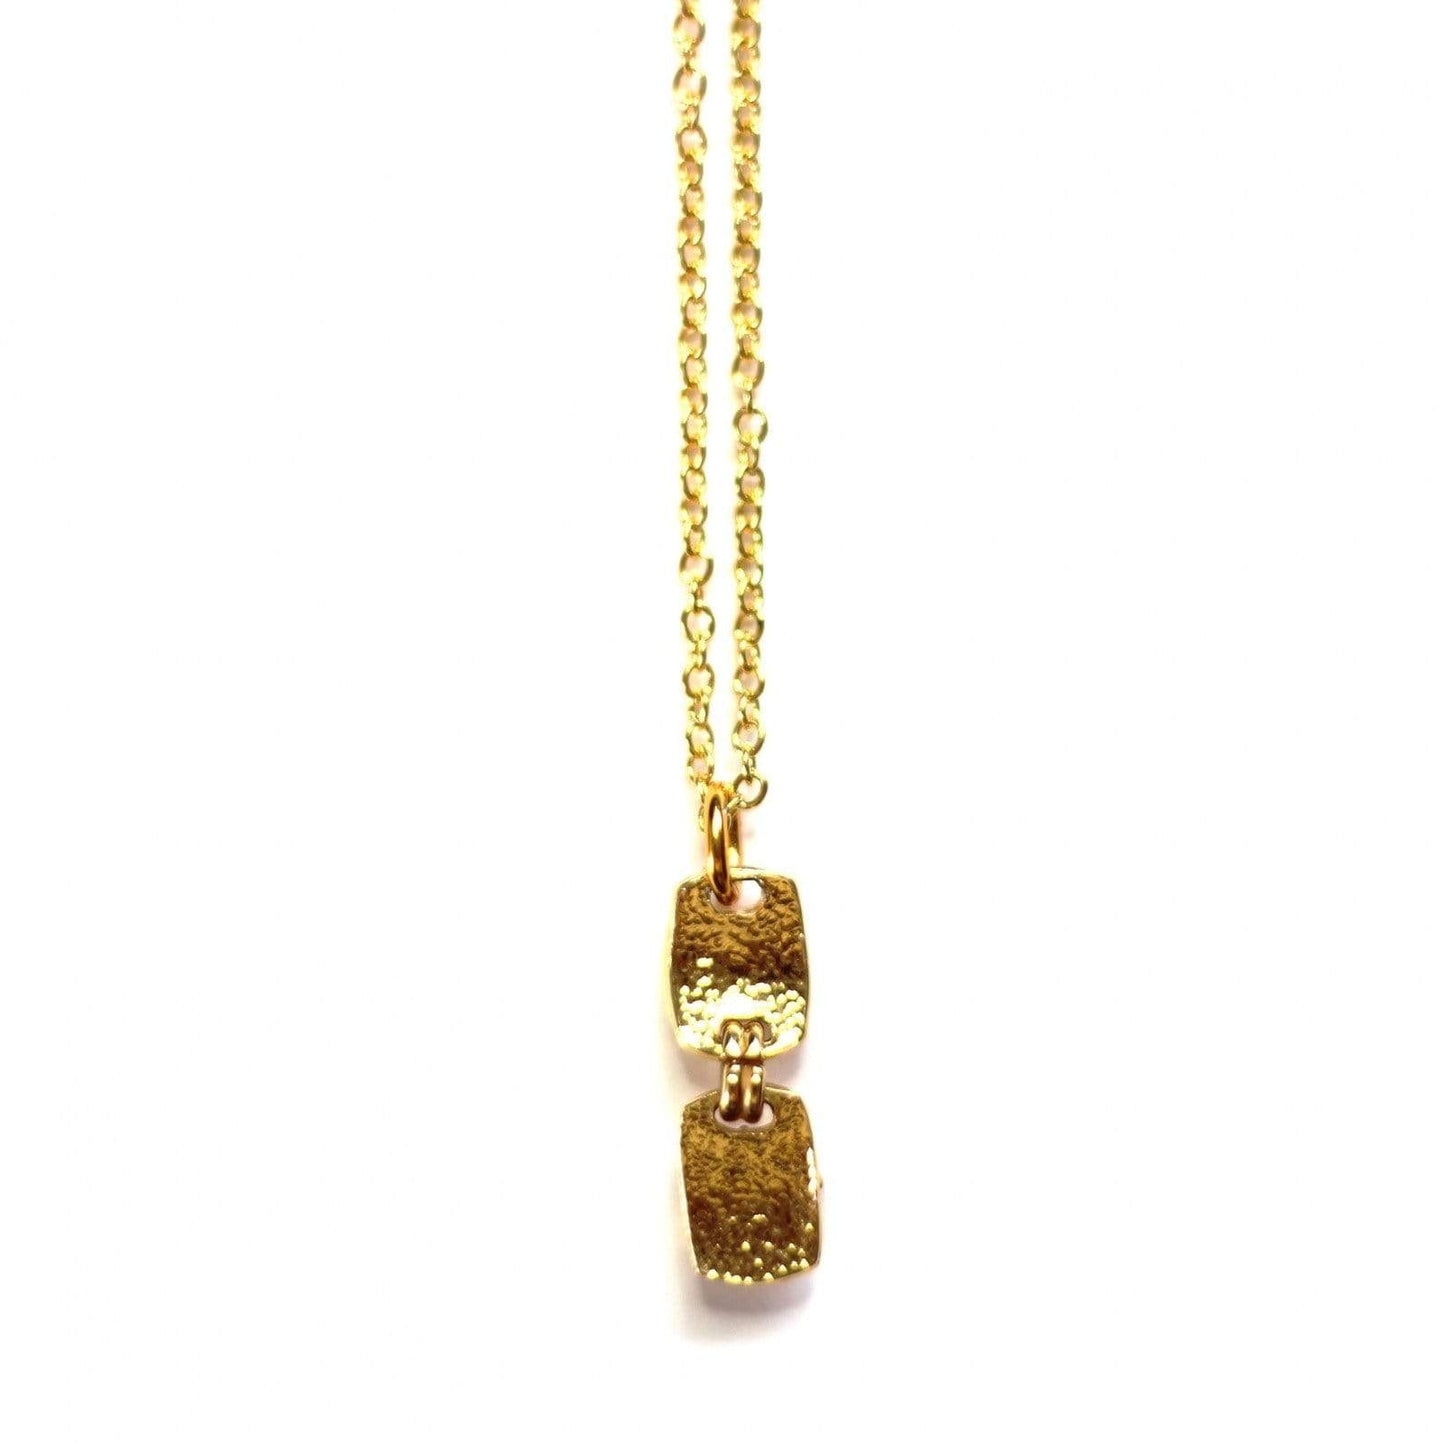 Gold Gianni Versace Greek Key Double Pendent Chain with Hanging Medusa Head RSTKD Vintage